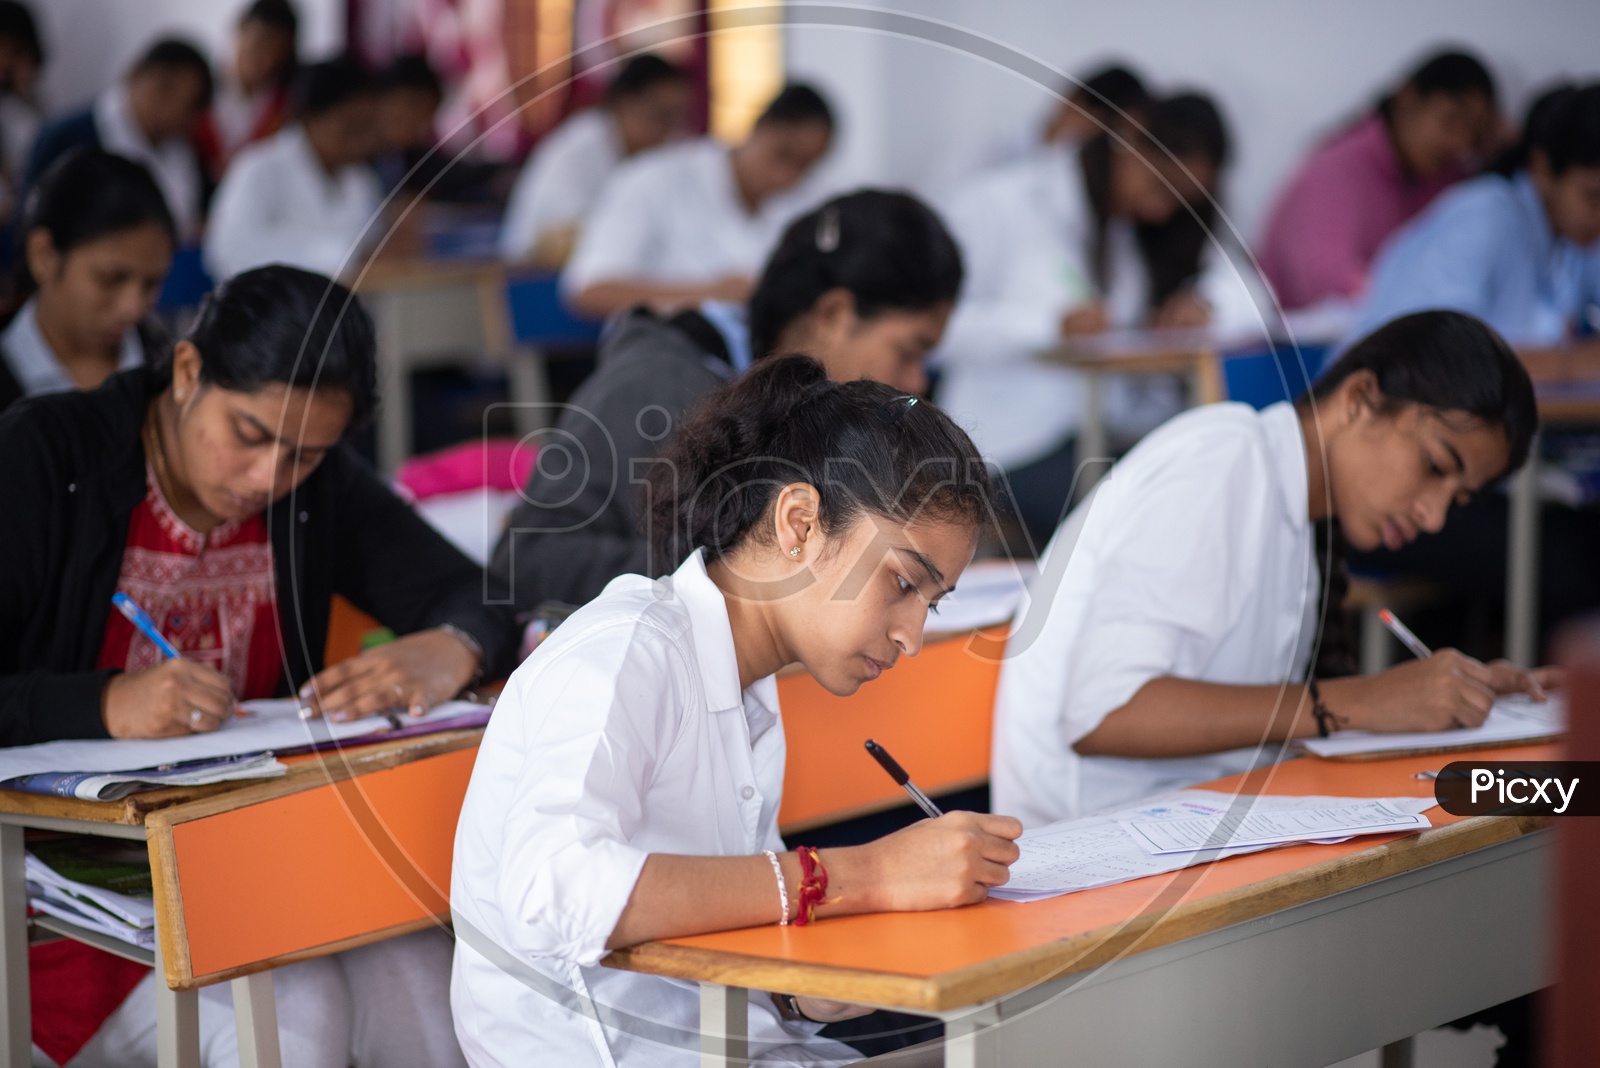 Student writing exam at an educational institute in Hyderabad